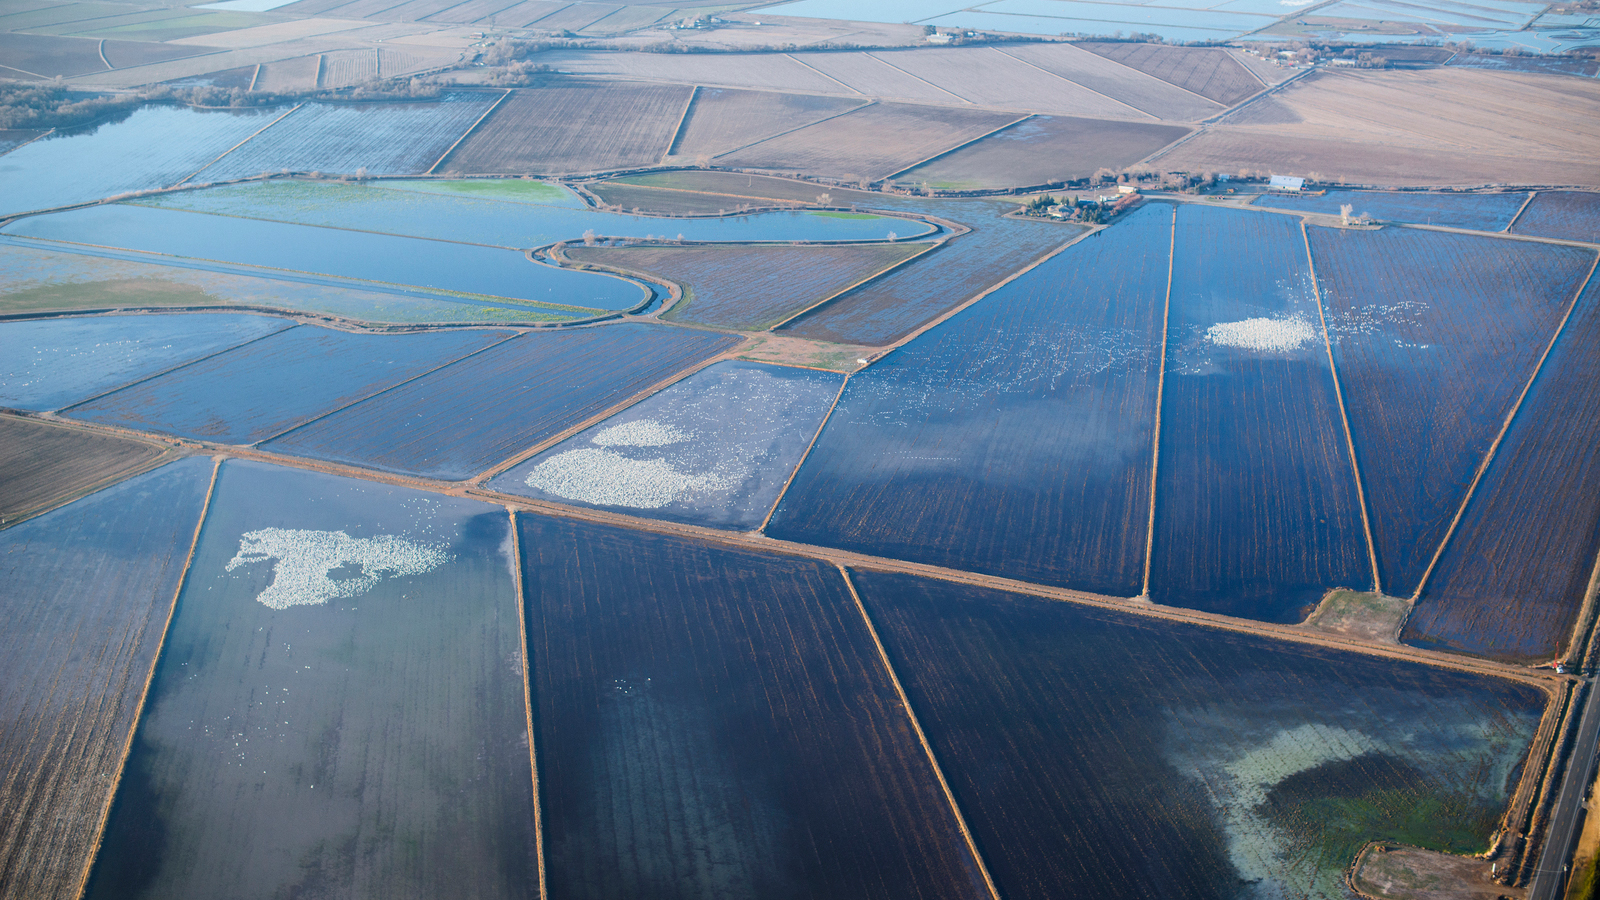 Aerial view of flooded rice fields participating in California's BirdReturns program. White areas are dense gatherings of birds. Photo © Drew Kelly for The Nature Conservancy